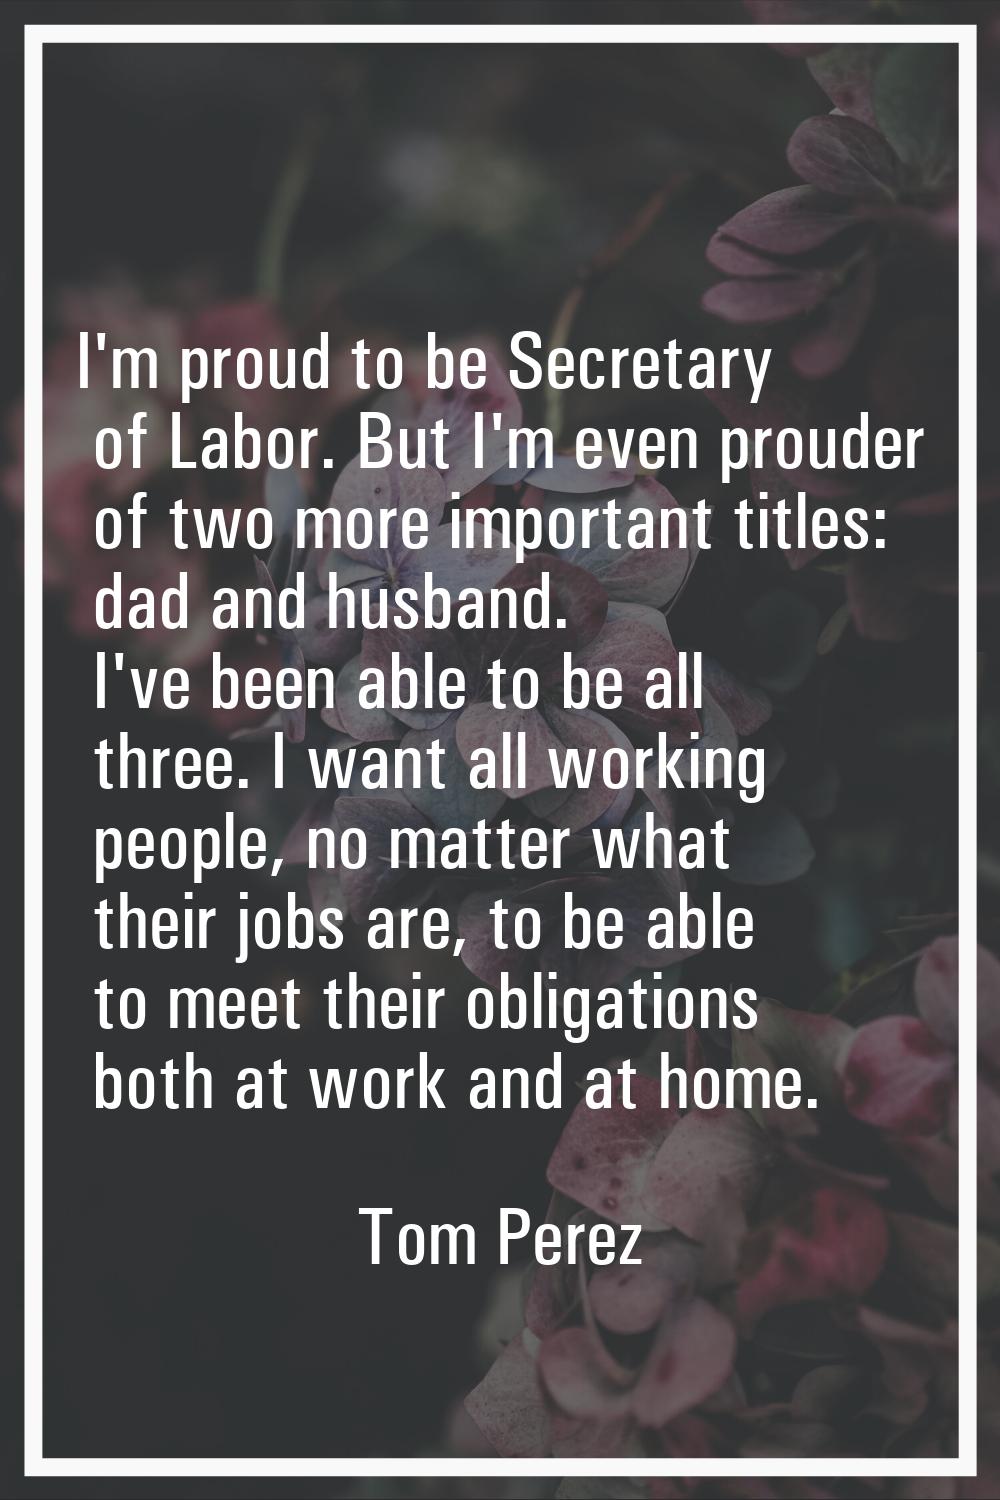 I'm proud to be Secretary of Labor. But I'm even prouder of two more important titles: dad and husb